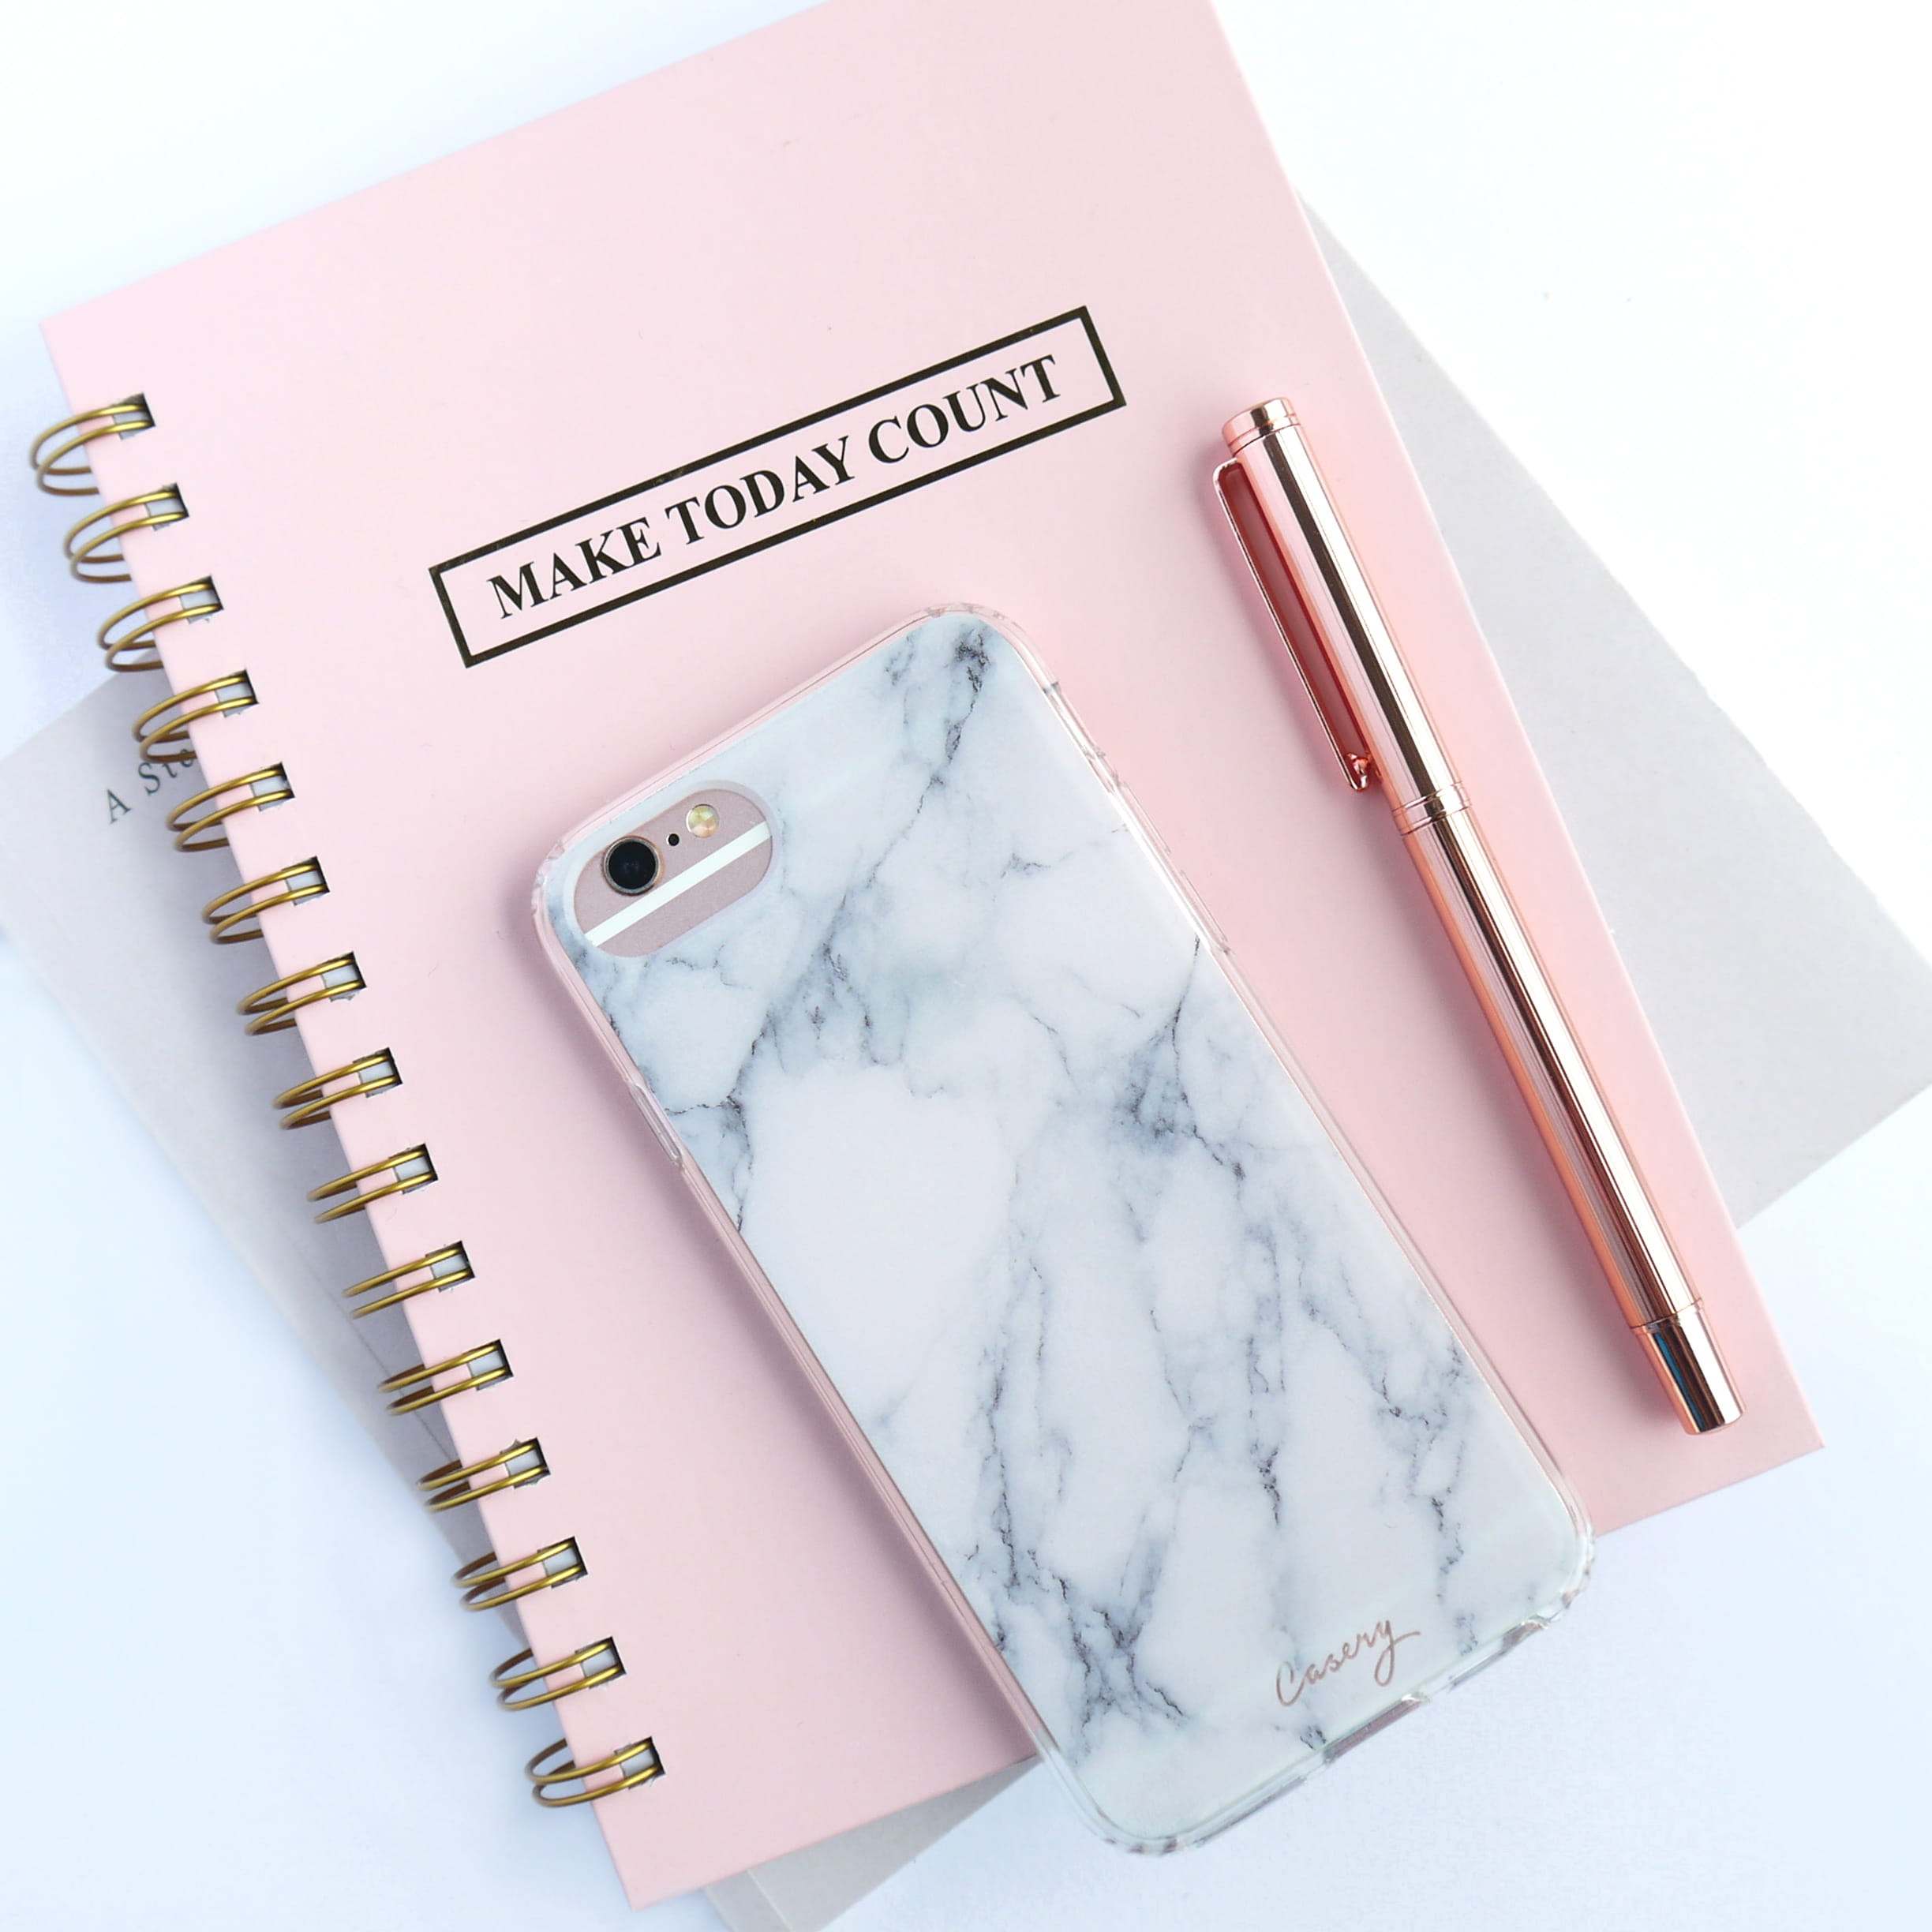 Wallpaper rose gold iPhone 6s and white and gray marble case, hertford